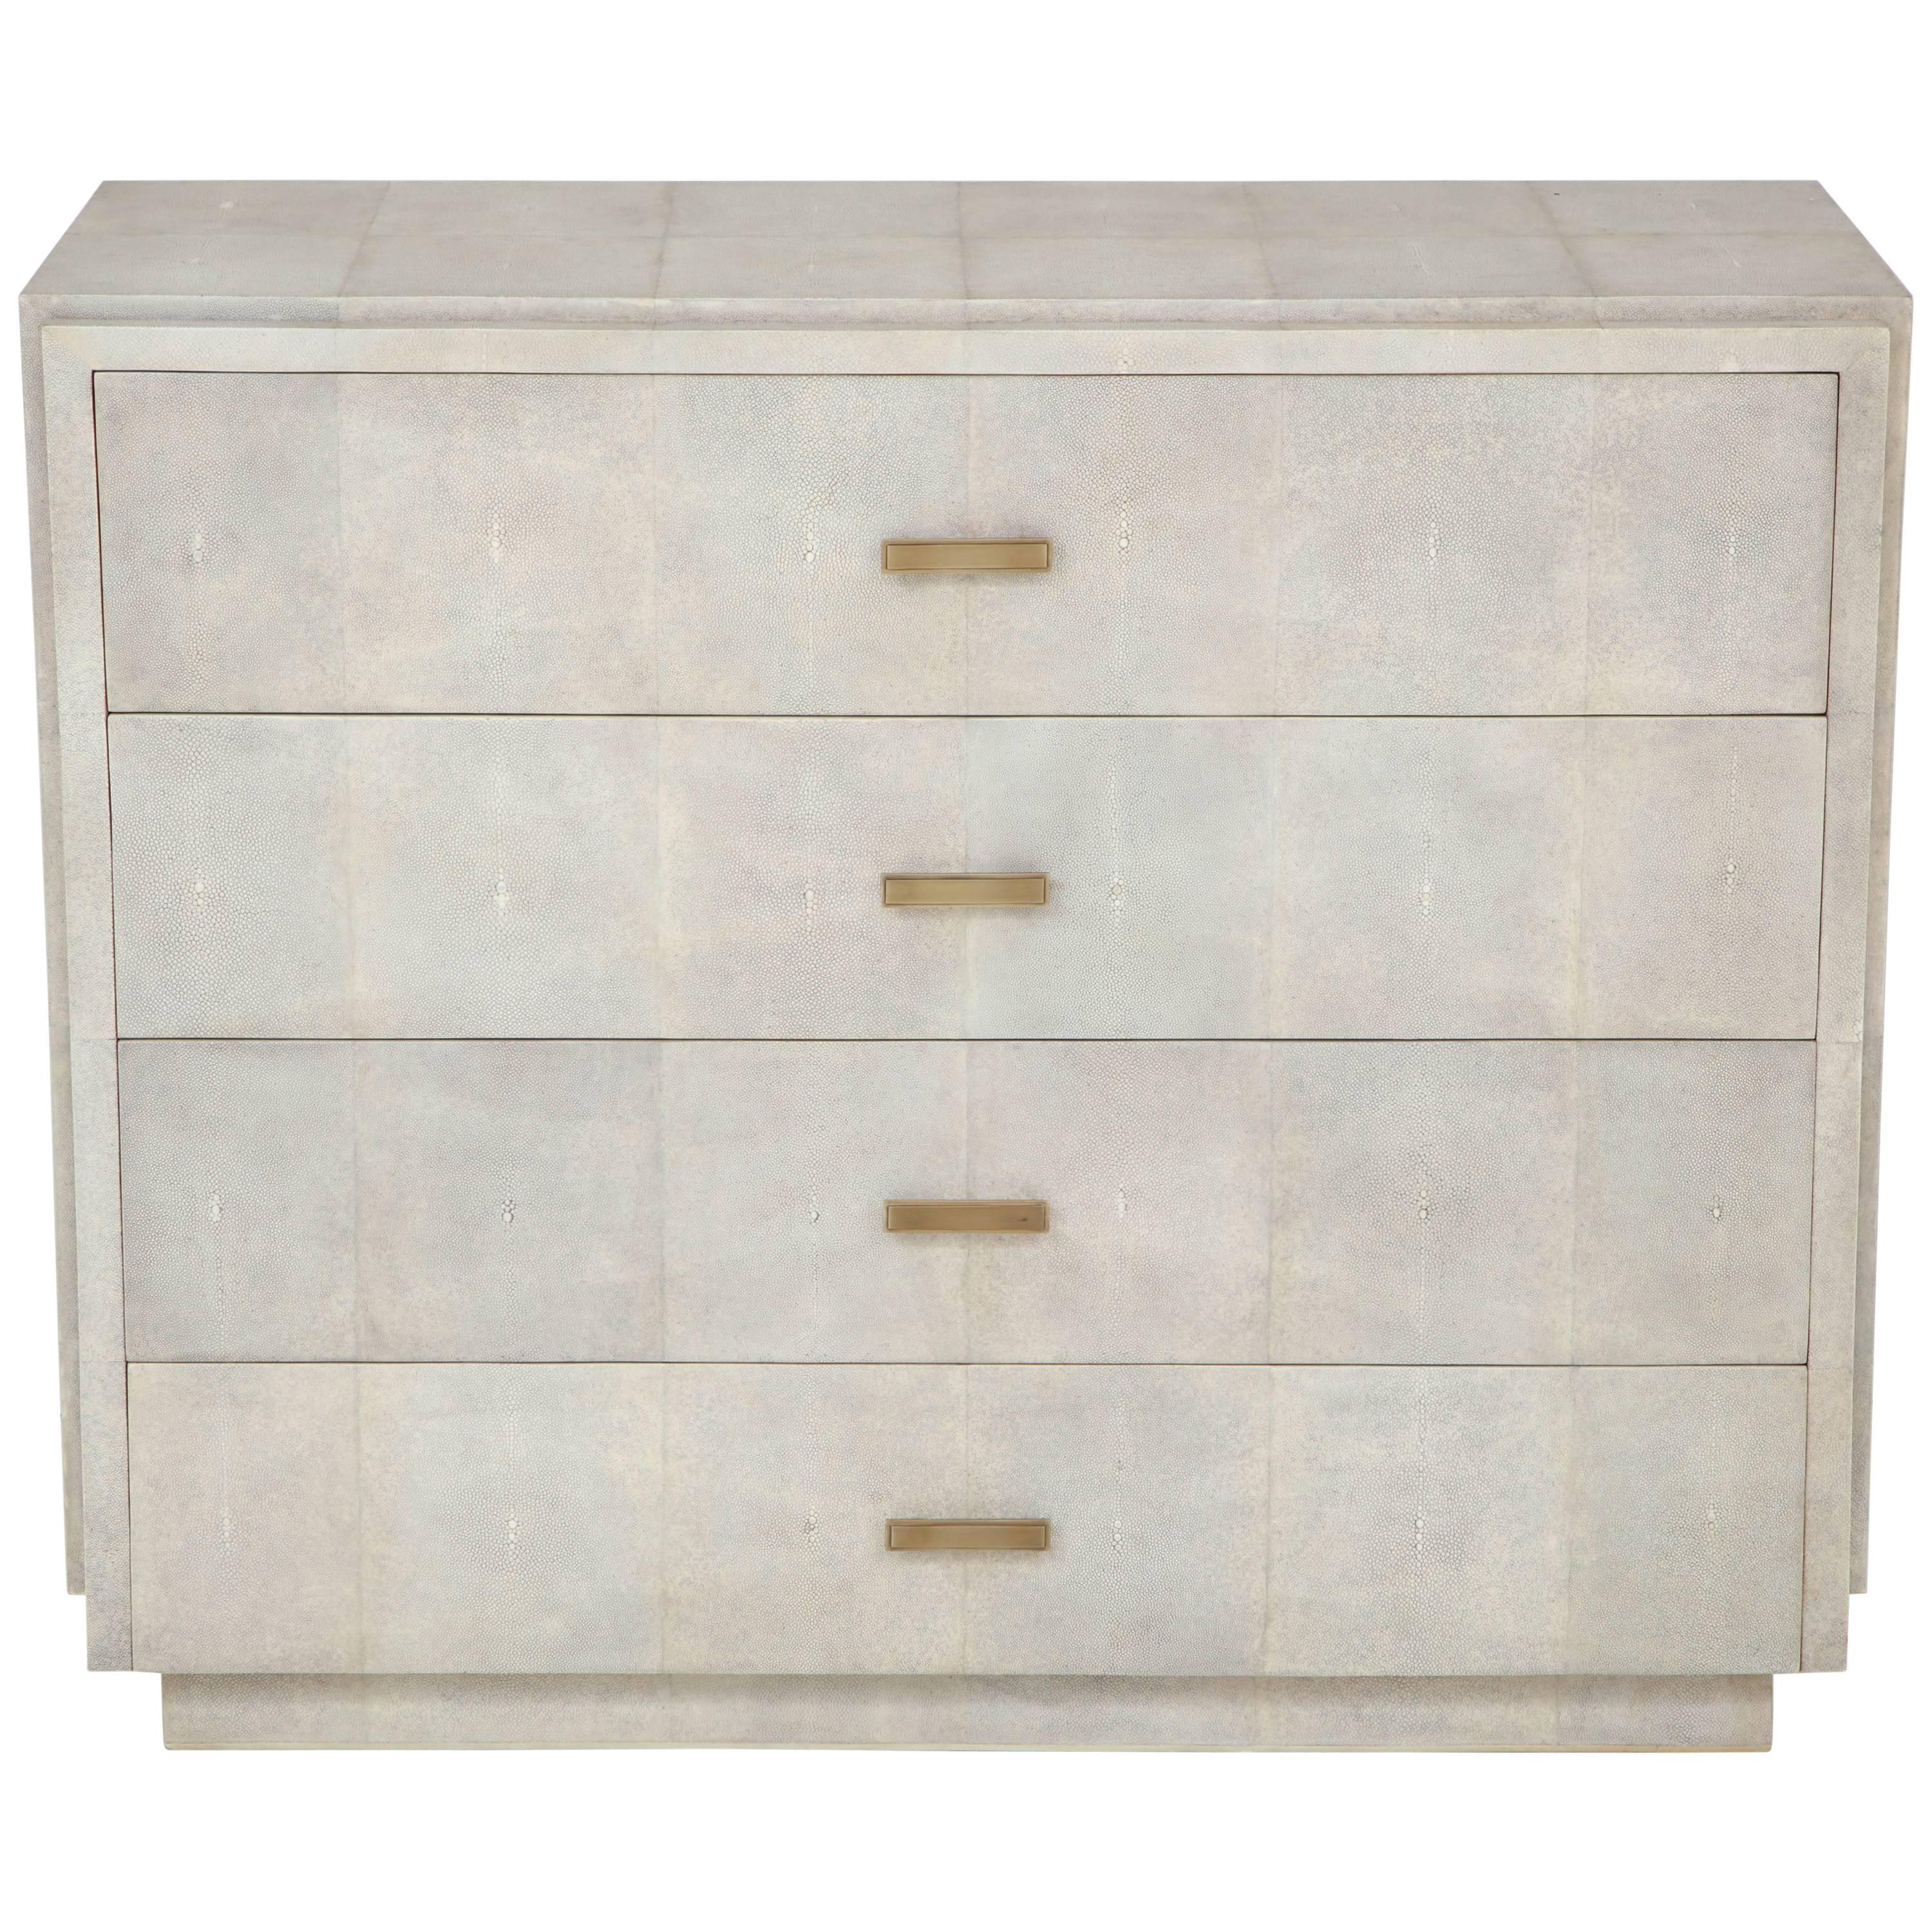 Shagreen Dresser, Offered by Area ID